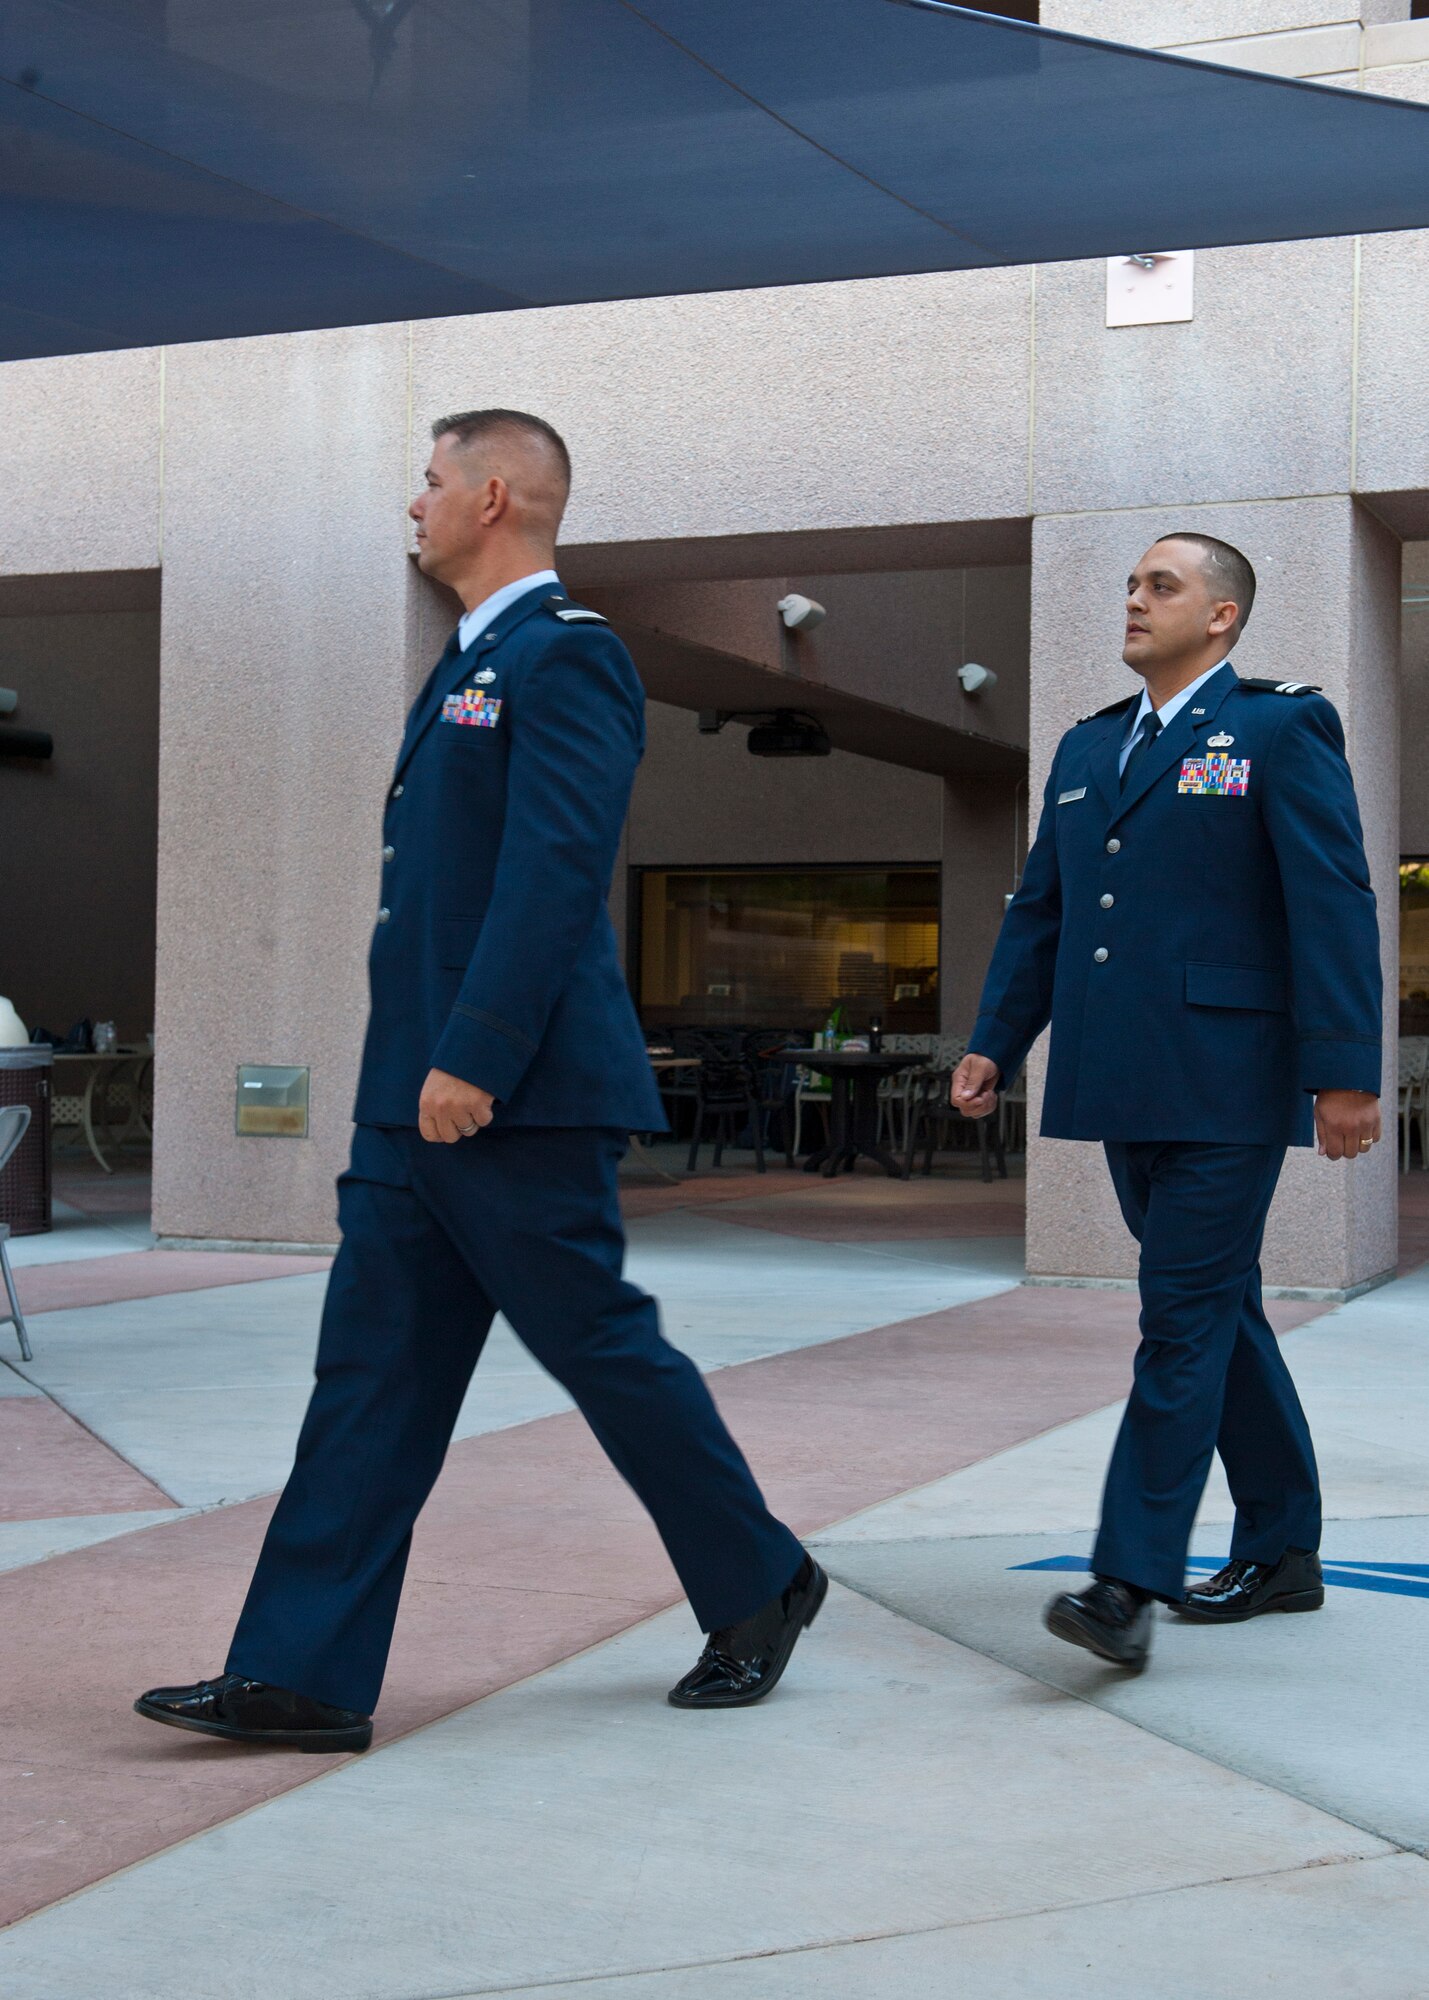 U.S Air Force 1st Lt. Kevin Stuessy (left), and 1st Lt. Christopher Gomez, Interservice Physician Assistant Program students, enter at the beginning of their graduation ceremony at the Mike O’Callaghan Federal Medical Center, June 6, 2014, at Nellis Air Force Base, Nev. Graduates of the IPAP are commissioned as First Lieutenants, if they are not already officers, and receive a Master Physician Assistant Studies diploma from the program’s affiliate, the University of Nebraska Medicine Center. (U.S. Air Force photo by Airman 1st Class Thomas Spangler)